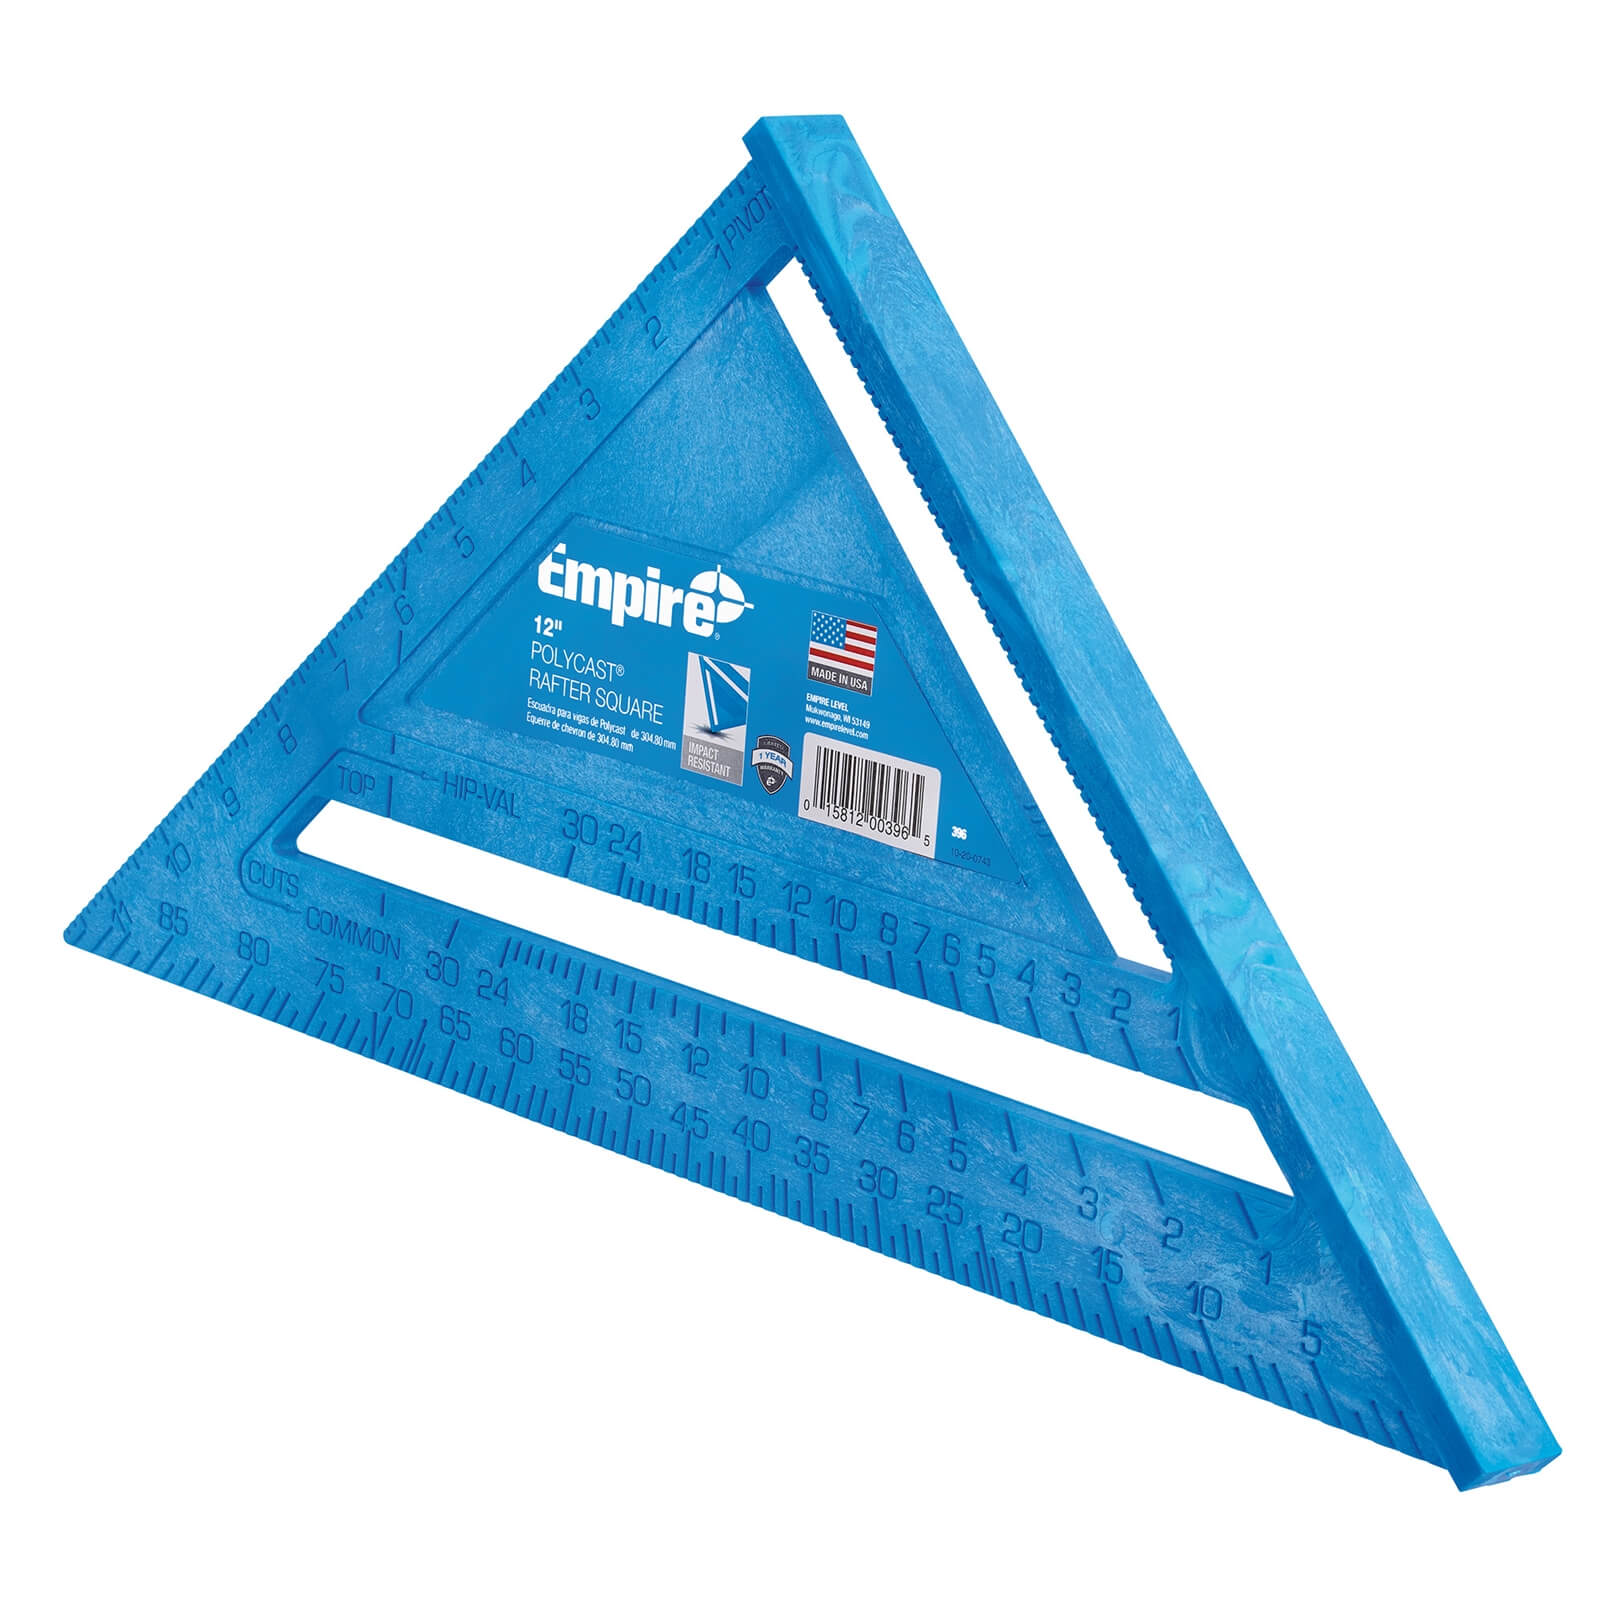 Empire POLYCAST Rafter Square - 7in